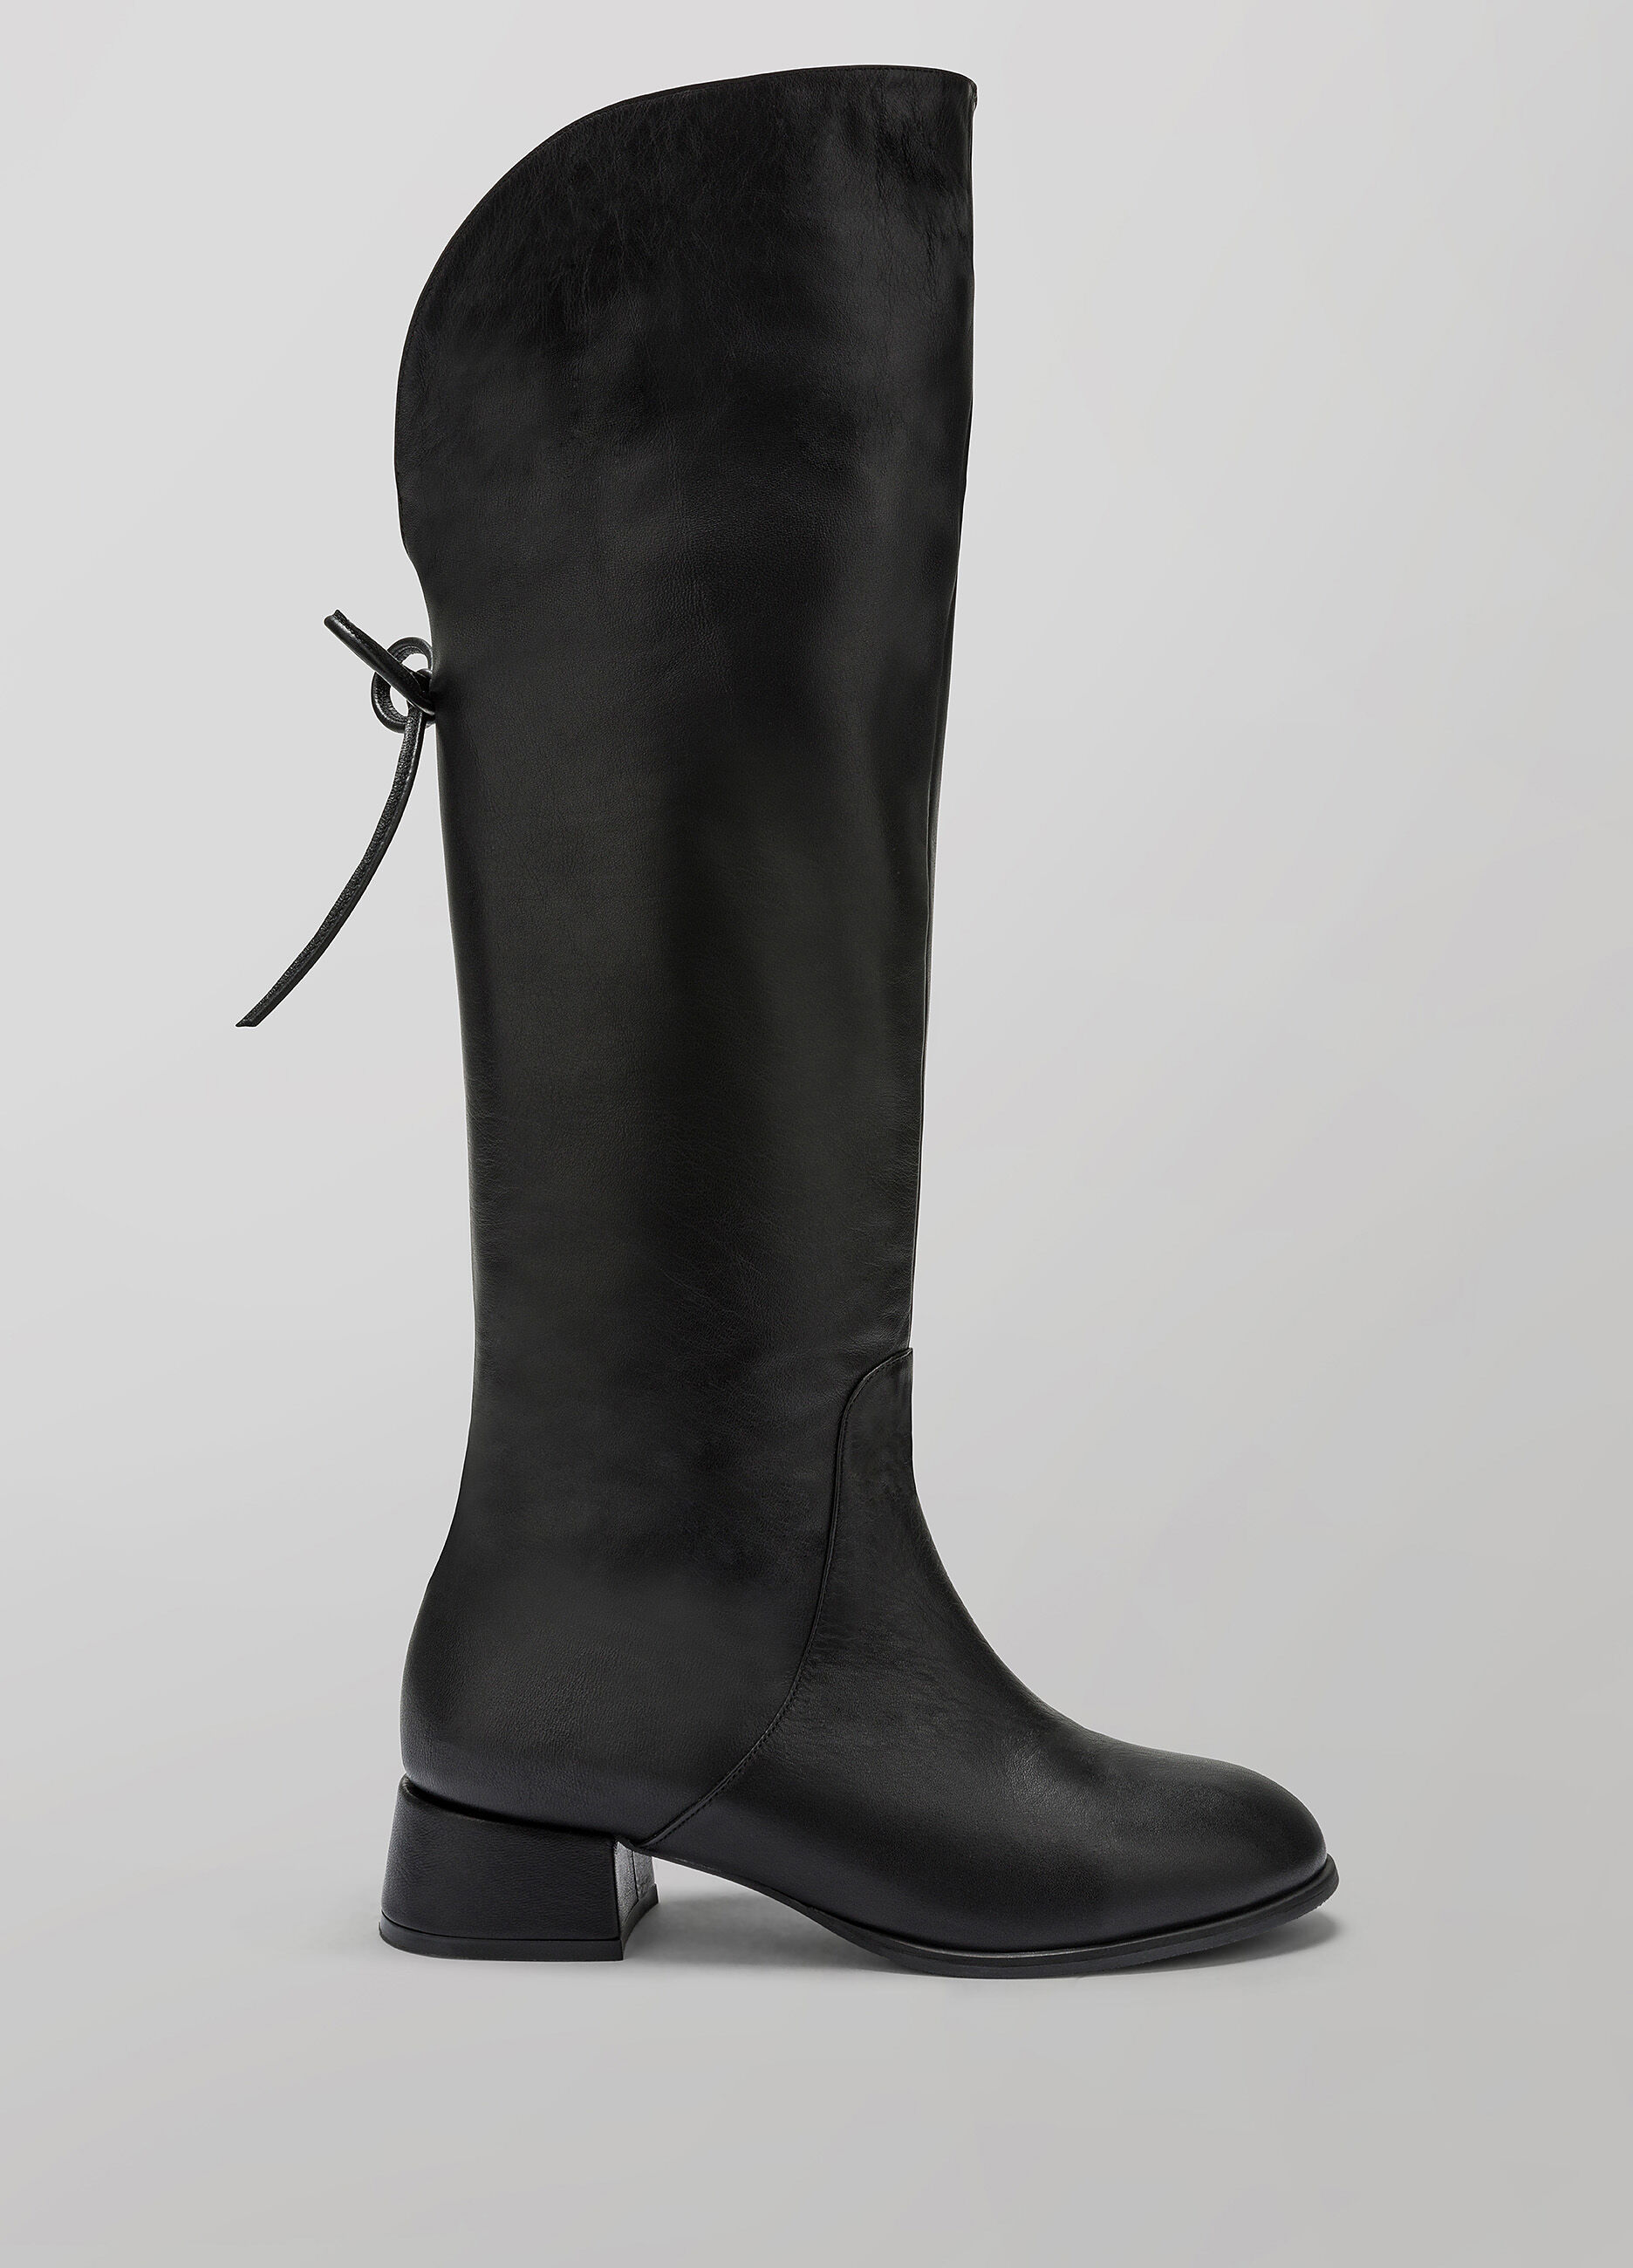 Black faux leather knee-high boot_1